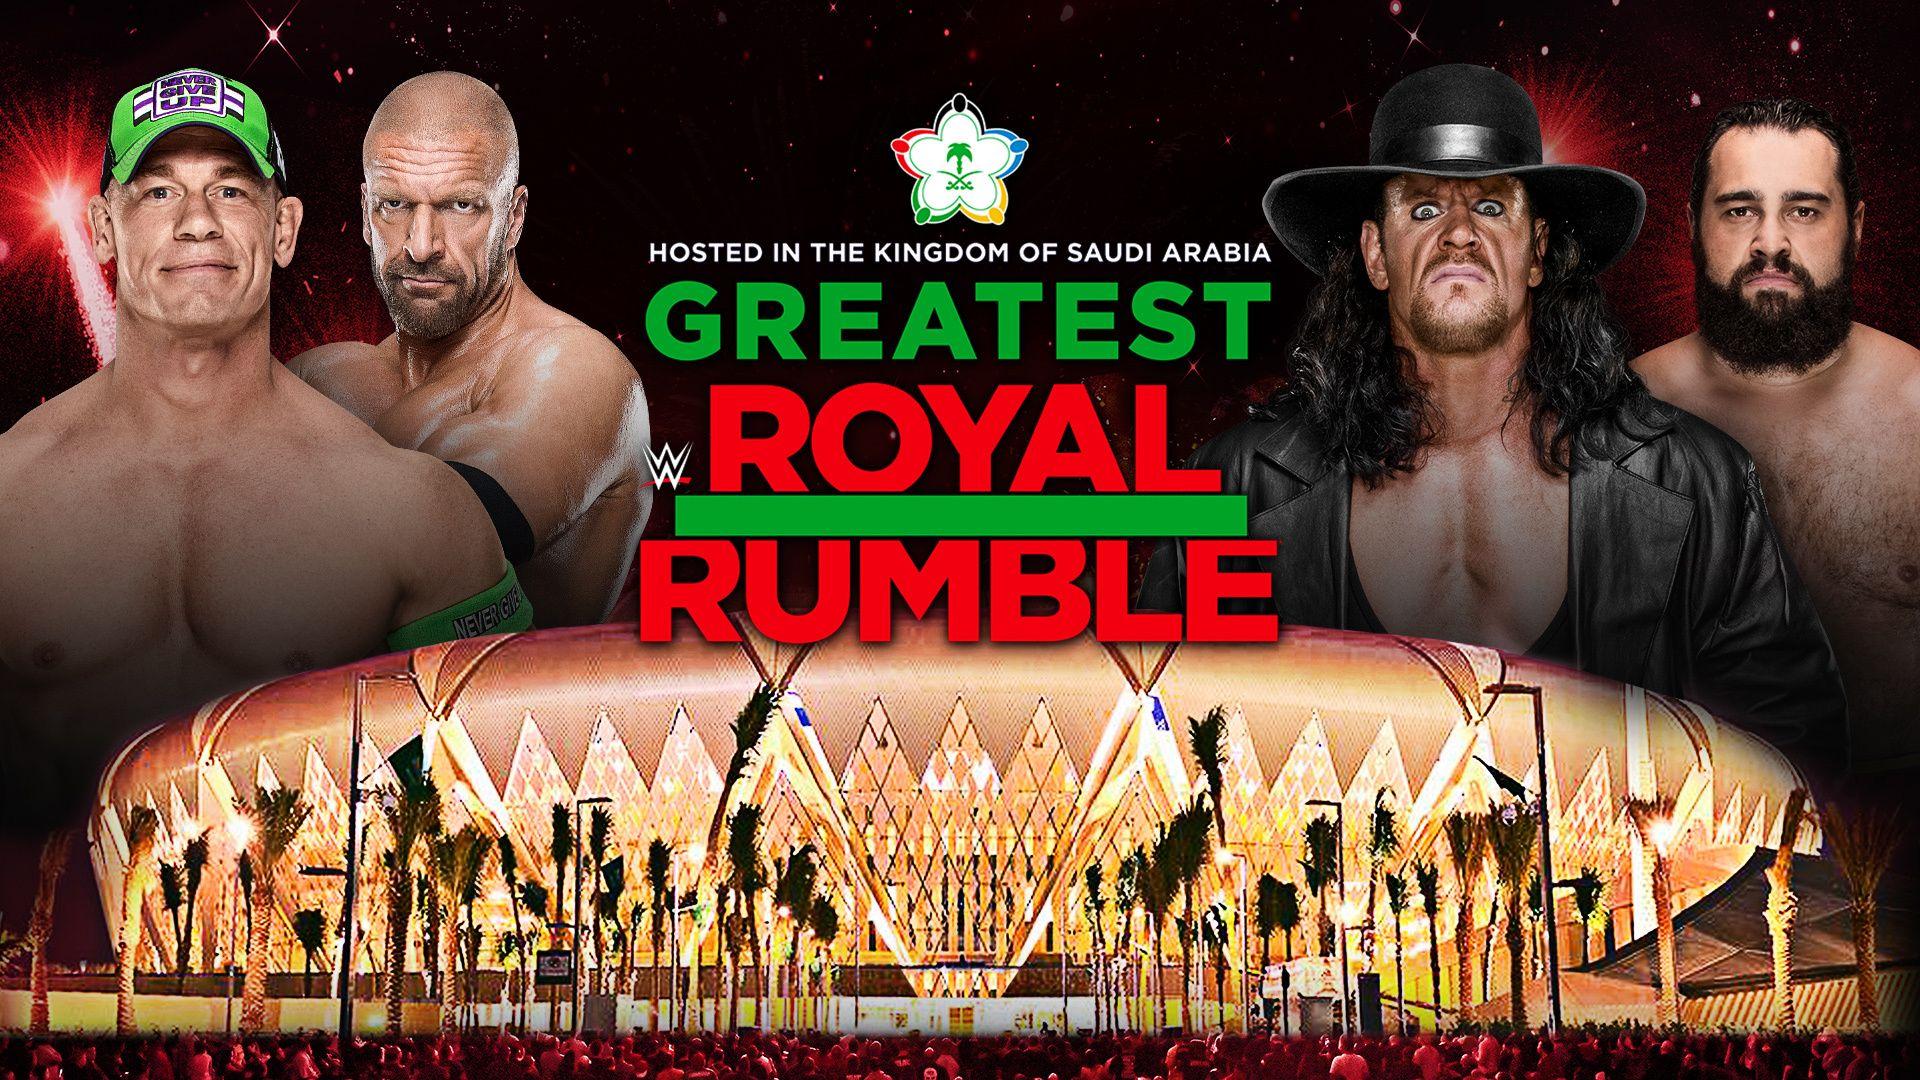 The Greatest Royal Rumble® is Sold Out